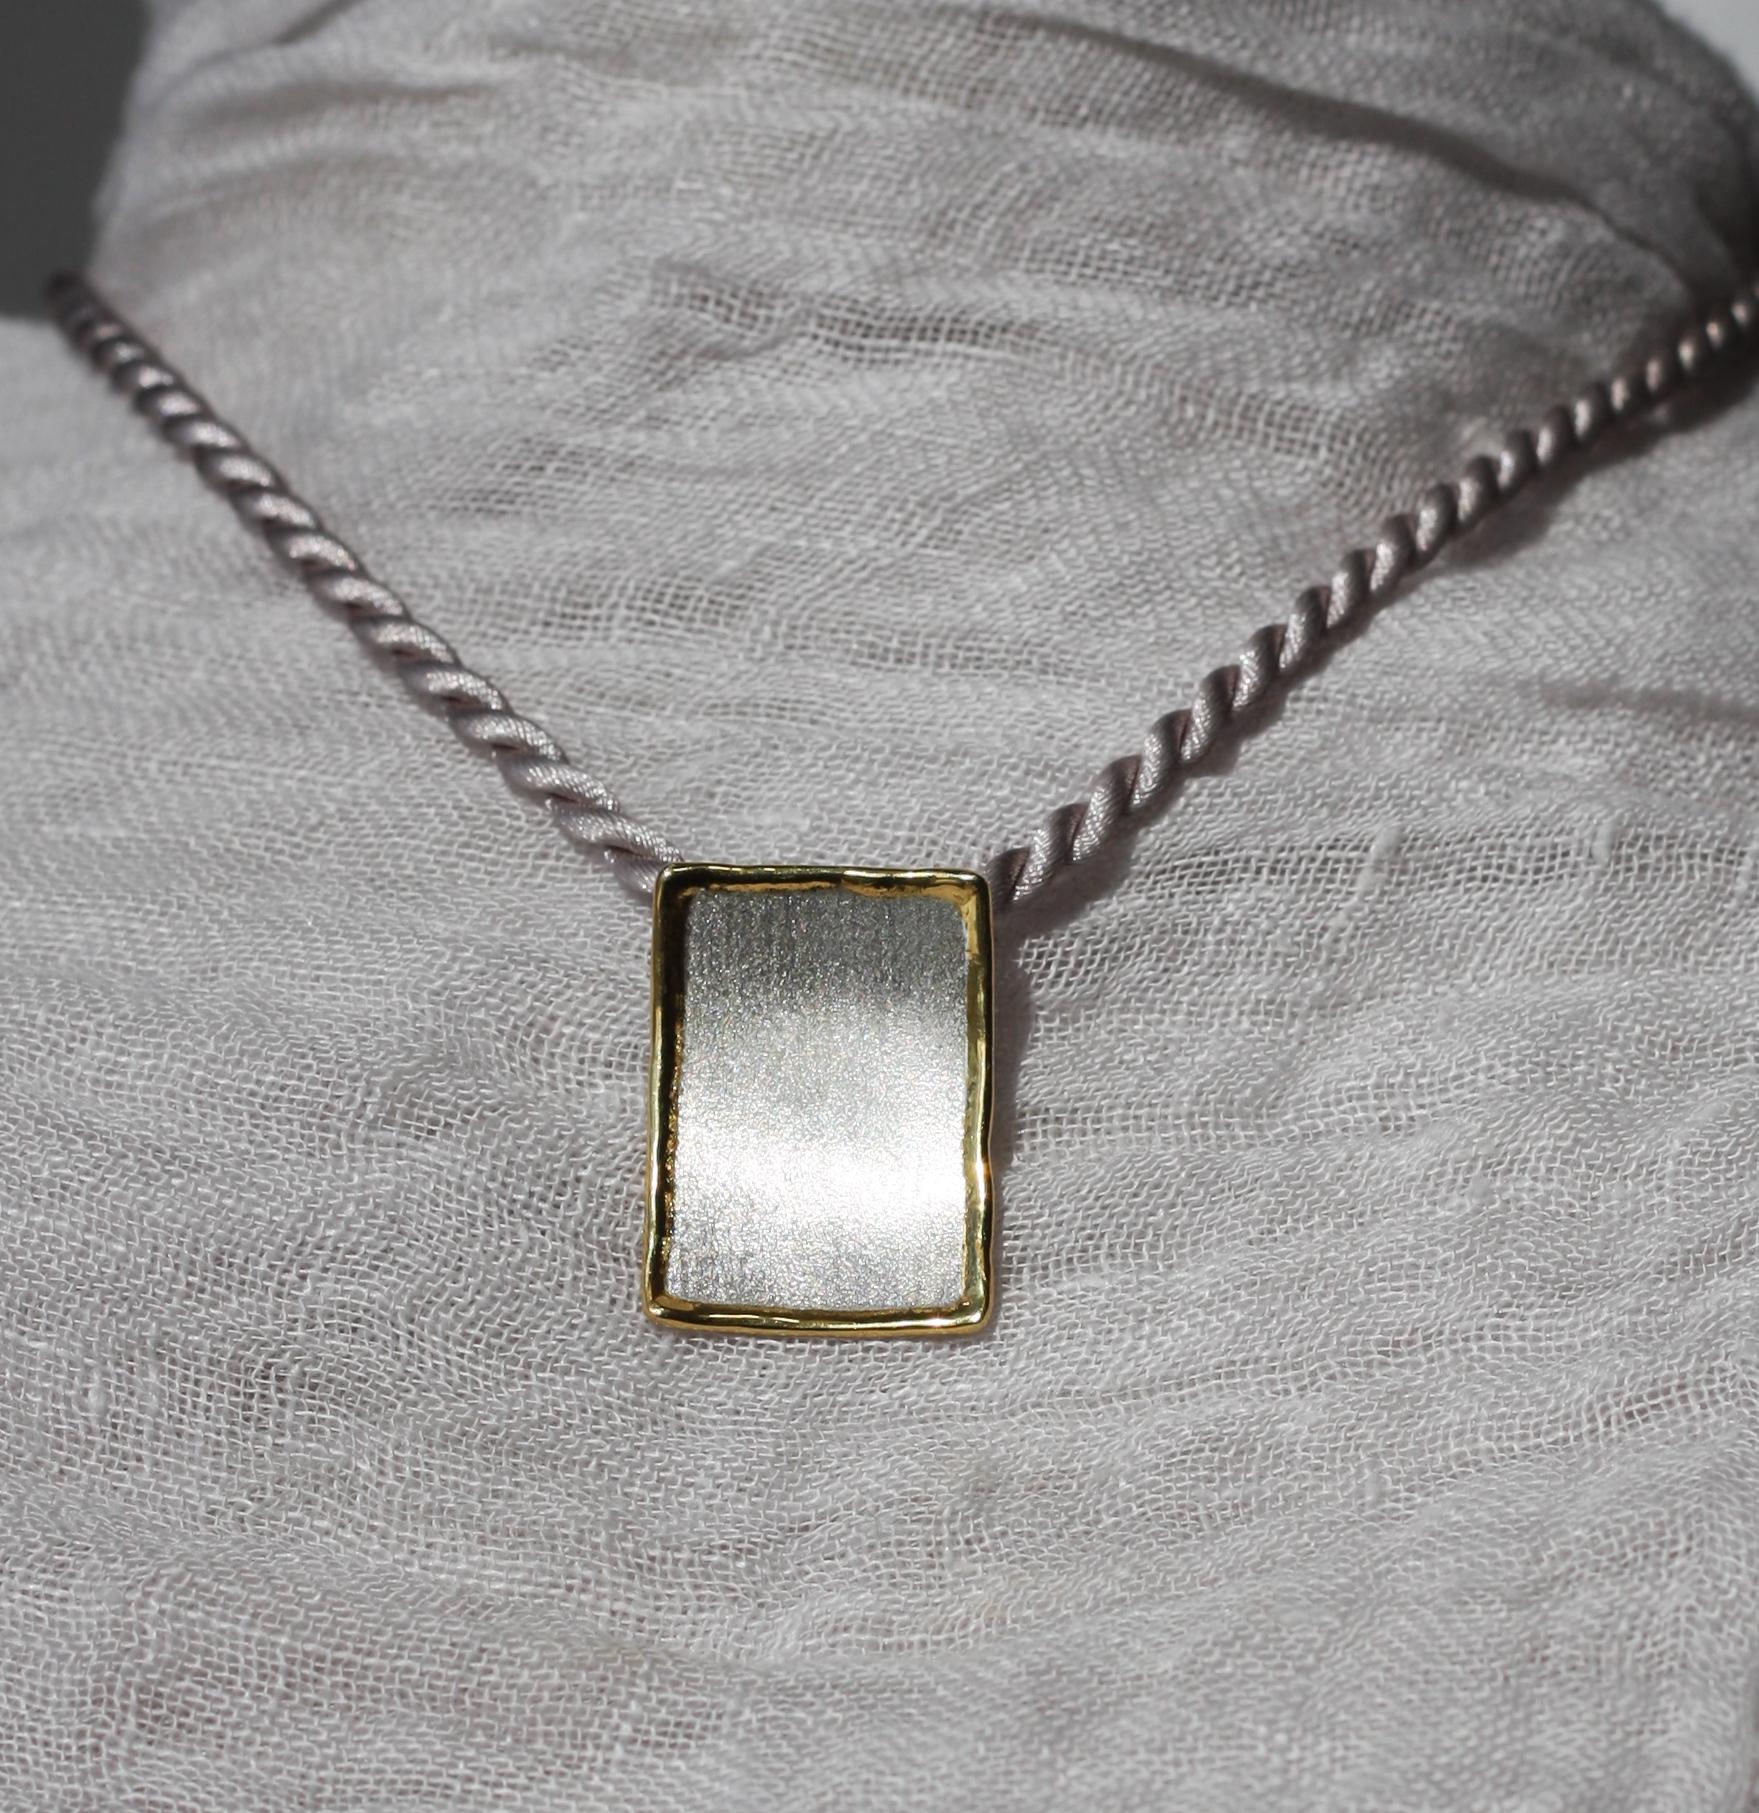 We are presenting Yianni Creations geometrically shaped pendant enhancer from Midas Collection, which is all handcrafted from fine silver 950 purity and plated with palladium to resist the elements. This rectangular artisan pendant in its purity